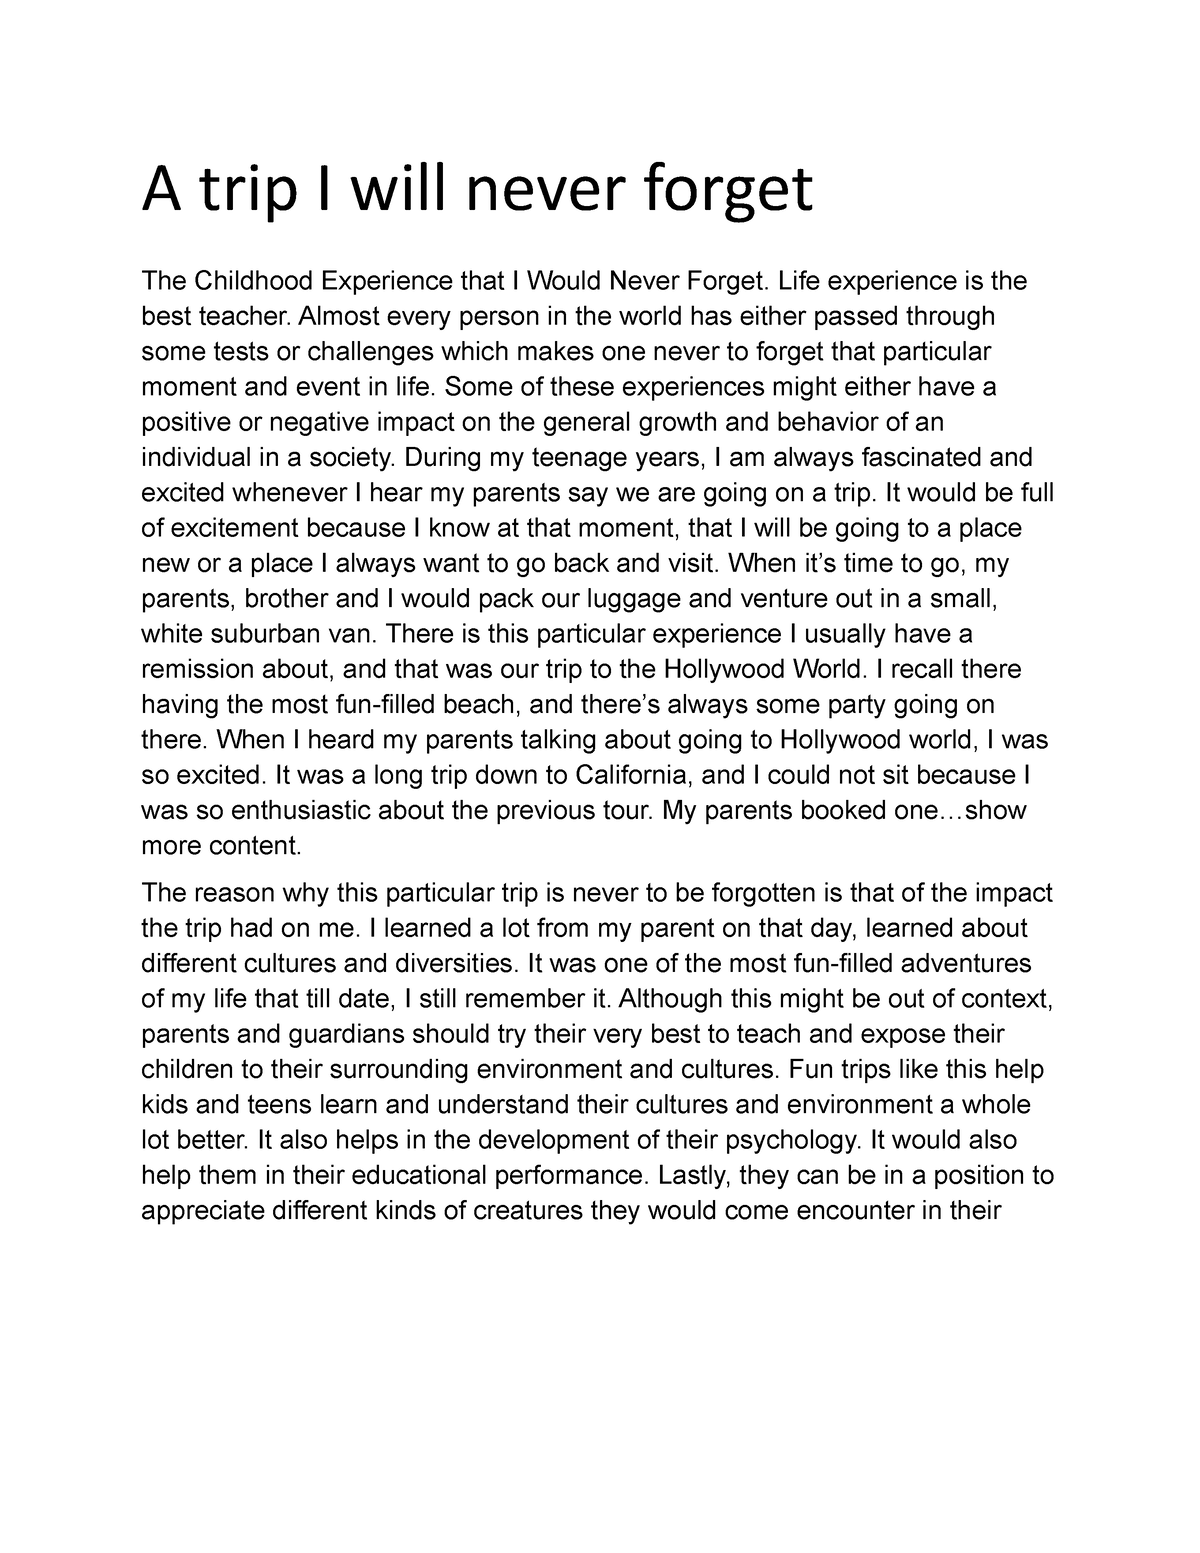 essay about a family trip i will never forget